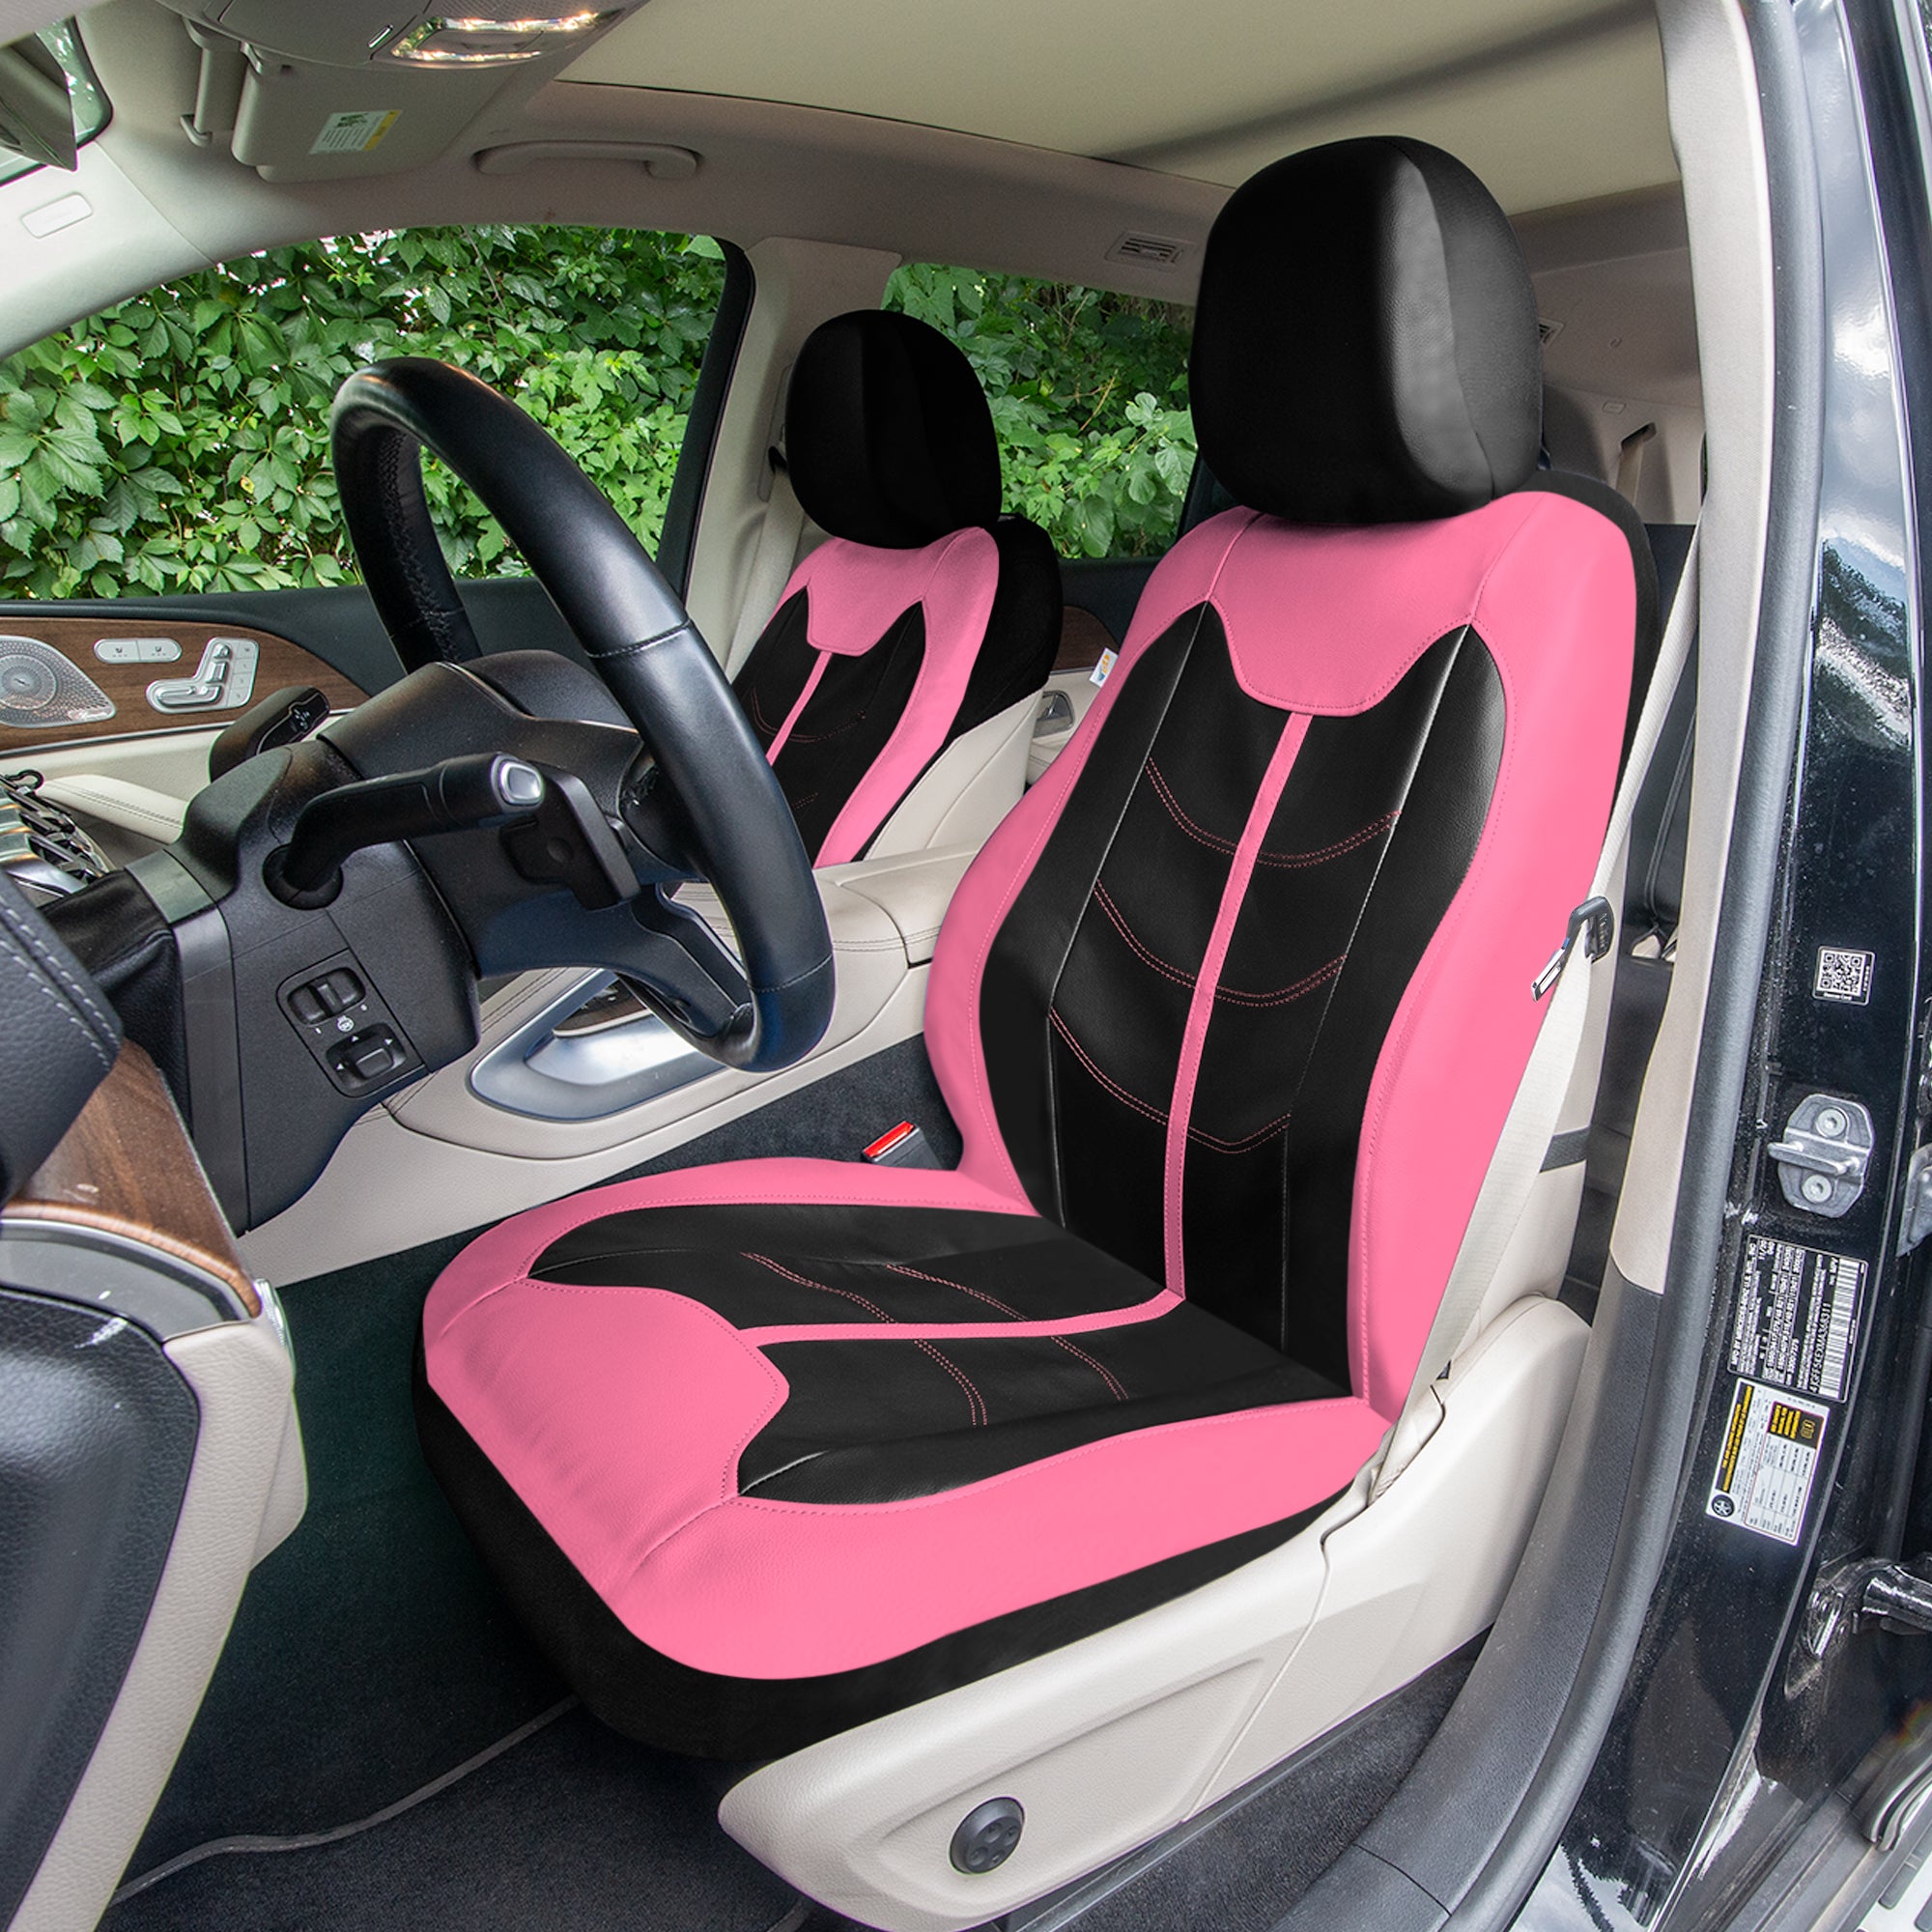 TLH Universal Fit Car Seat Cover - Full Set of Automotive Seat Covers Pink